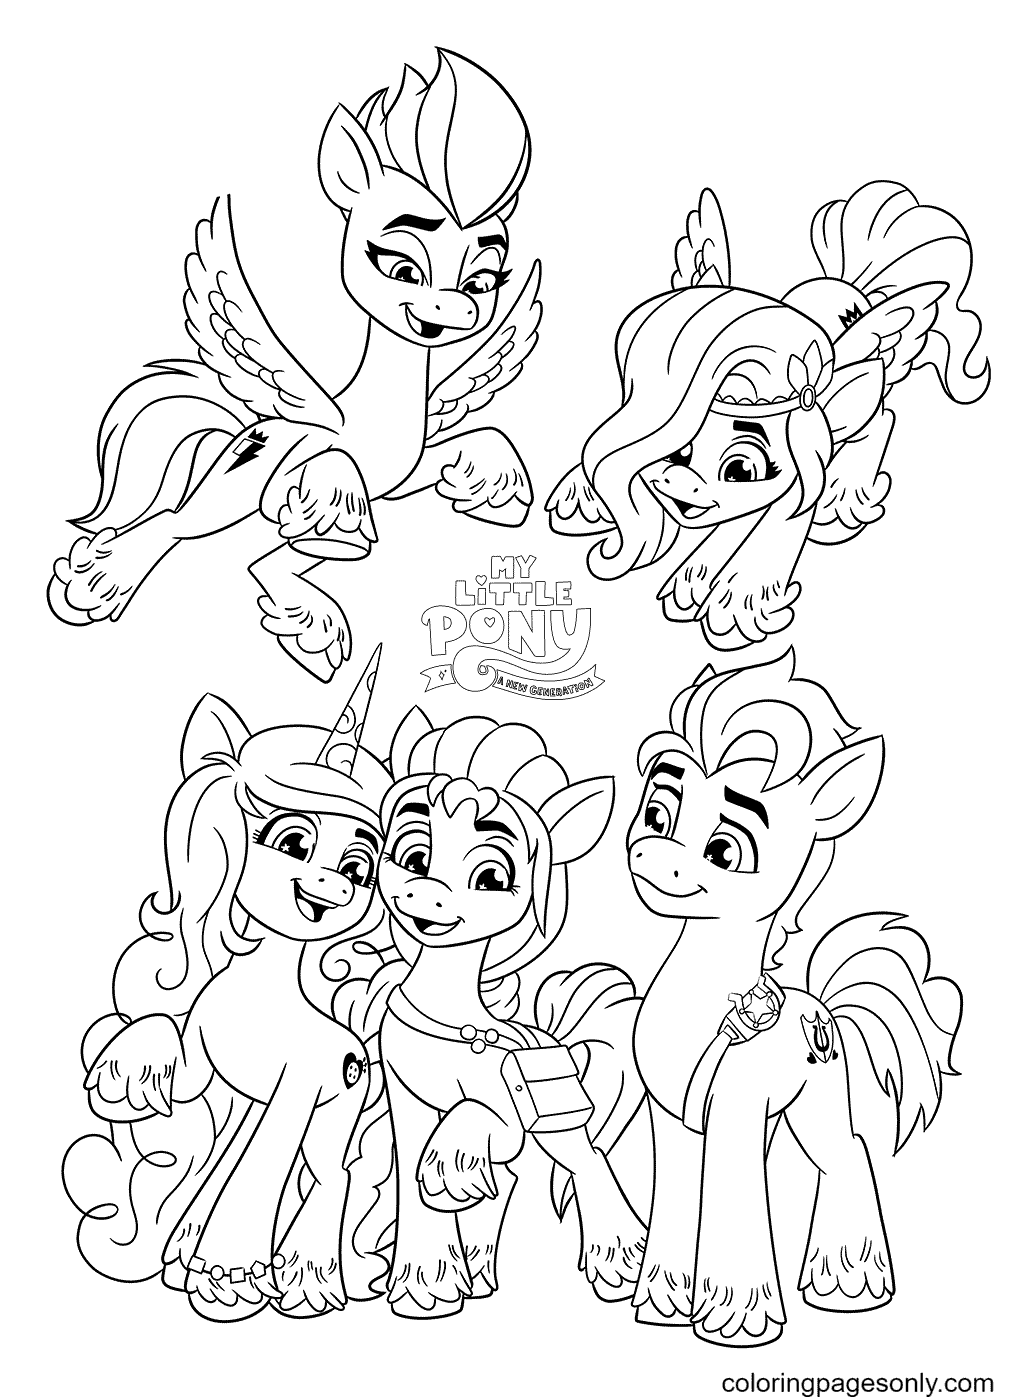 My Little Pony A New Generation movie Coloring Pages   My Little ...